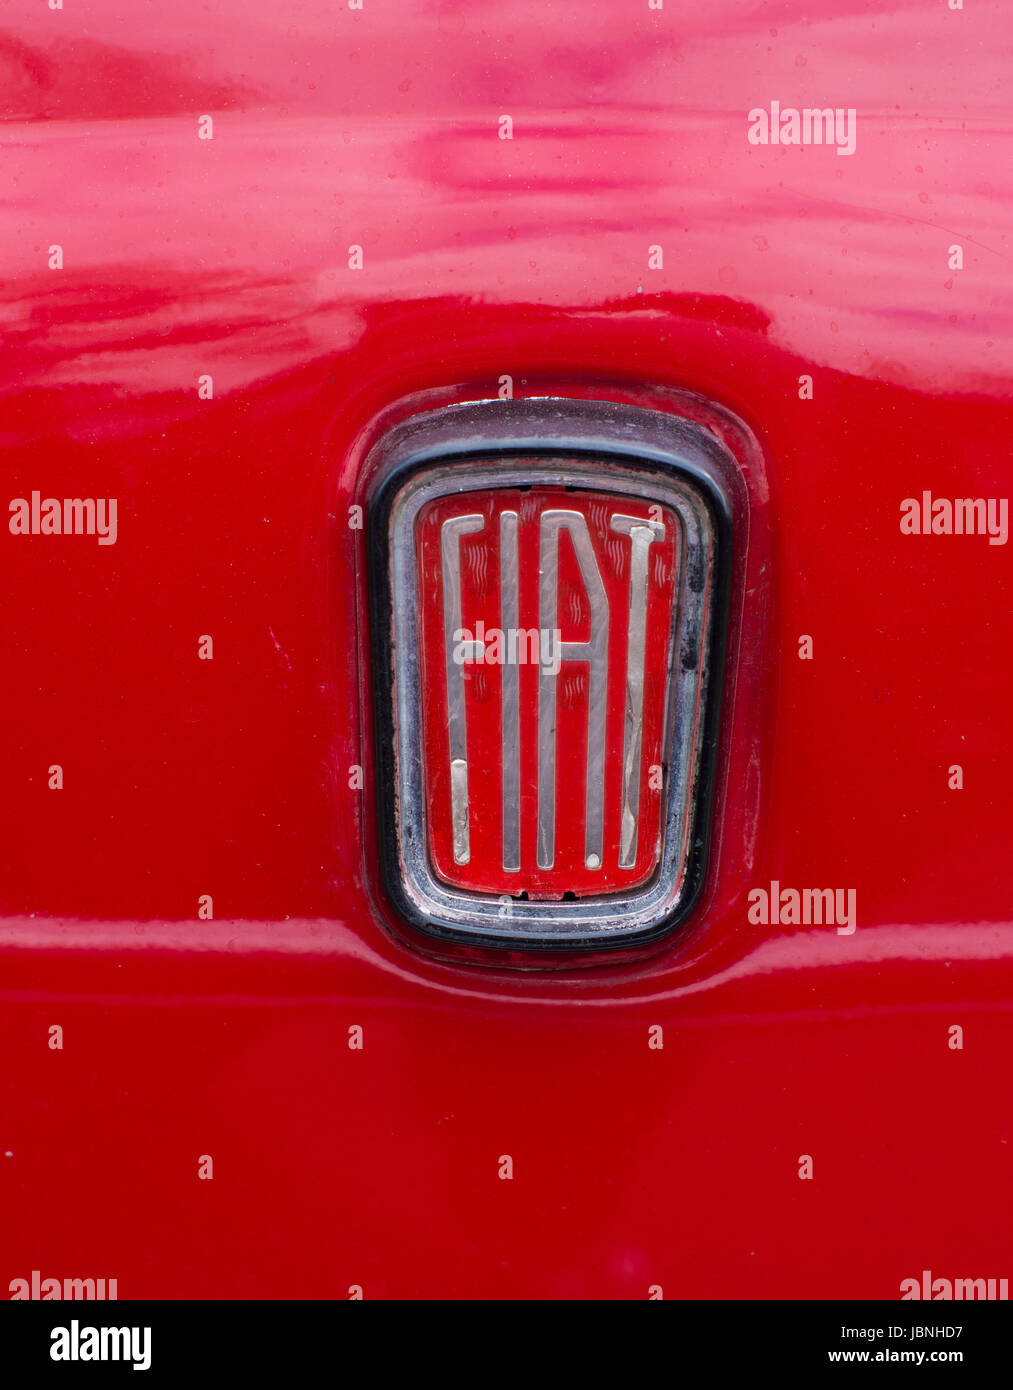 close-up of an old fiat logo on a red car. In honor of the 100th anniversary in 1999, the logo was modernized. Stock Photo